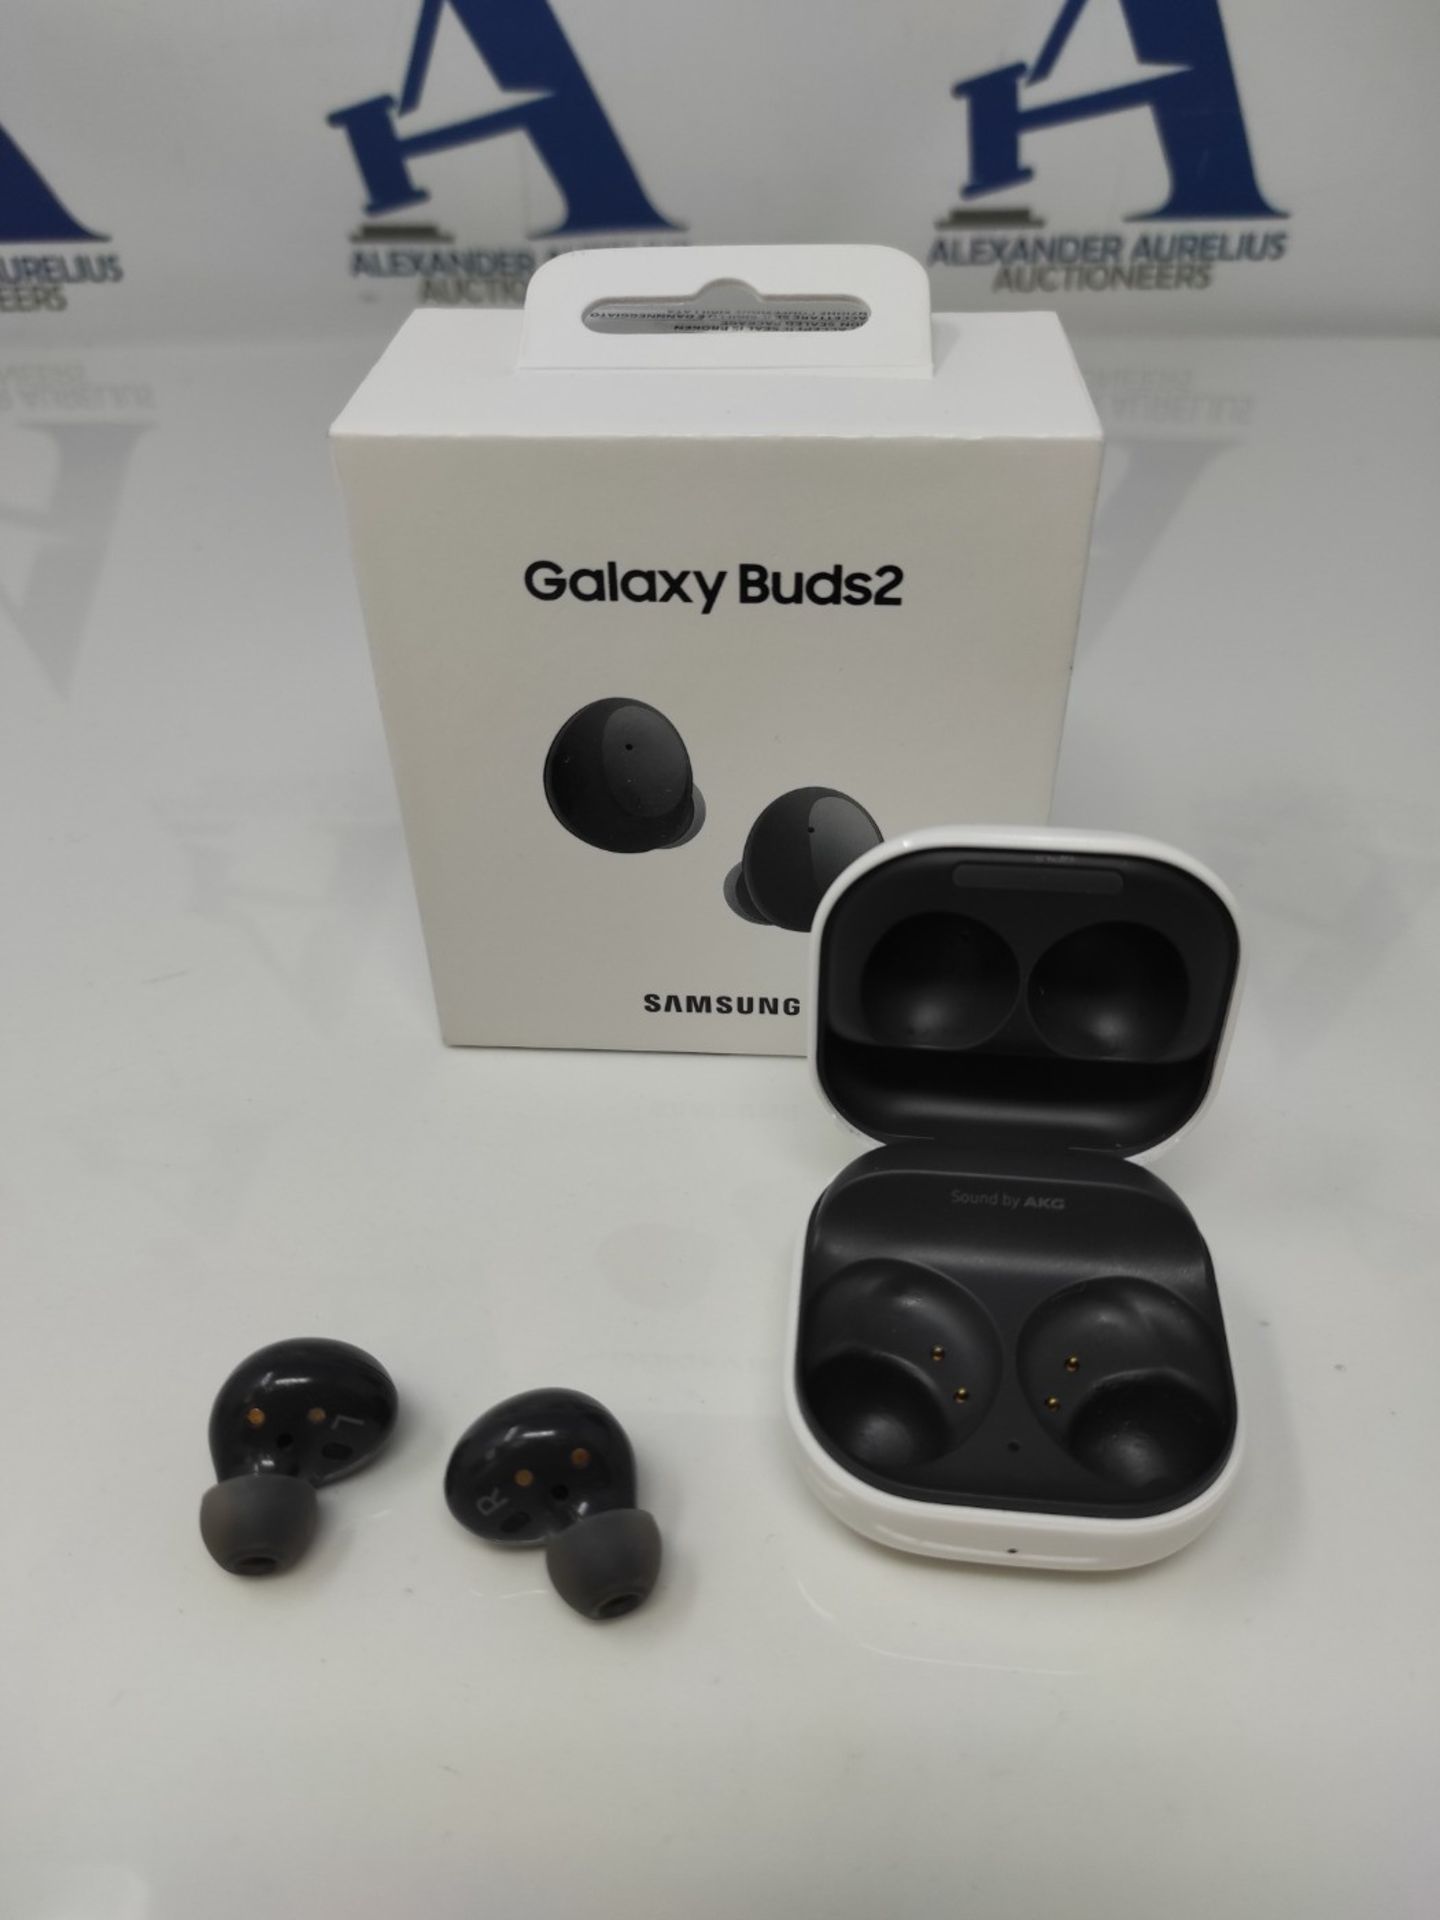 RRP £99.00 [INCOMPLETE] Samsung Galaxy Buds2 Wireless Earphones, 2 Year Extended Manufacturer War - Image 3 of 3